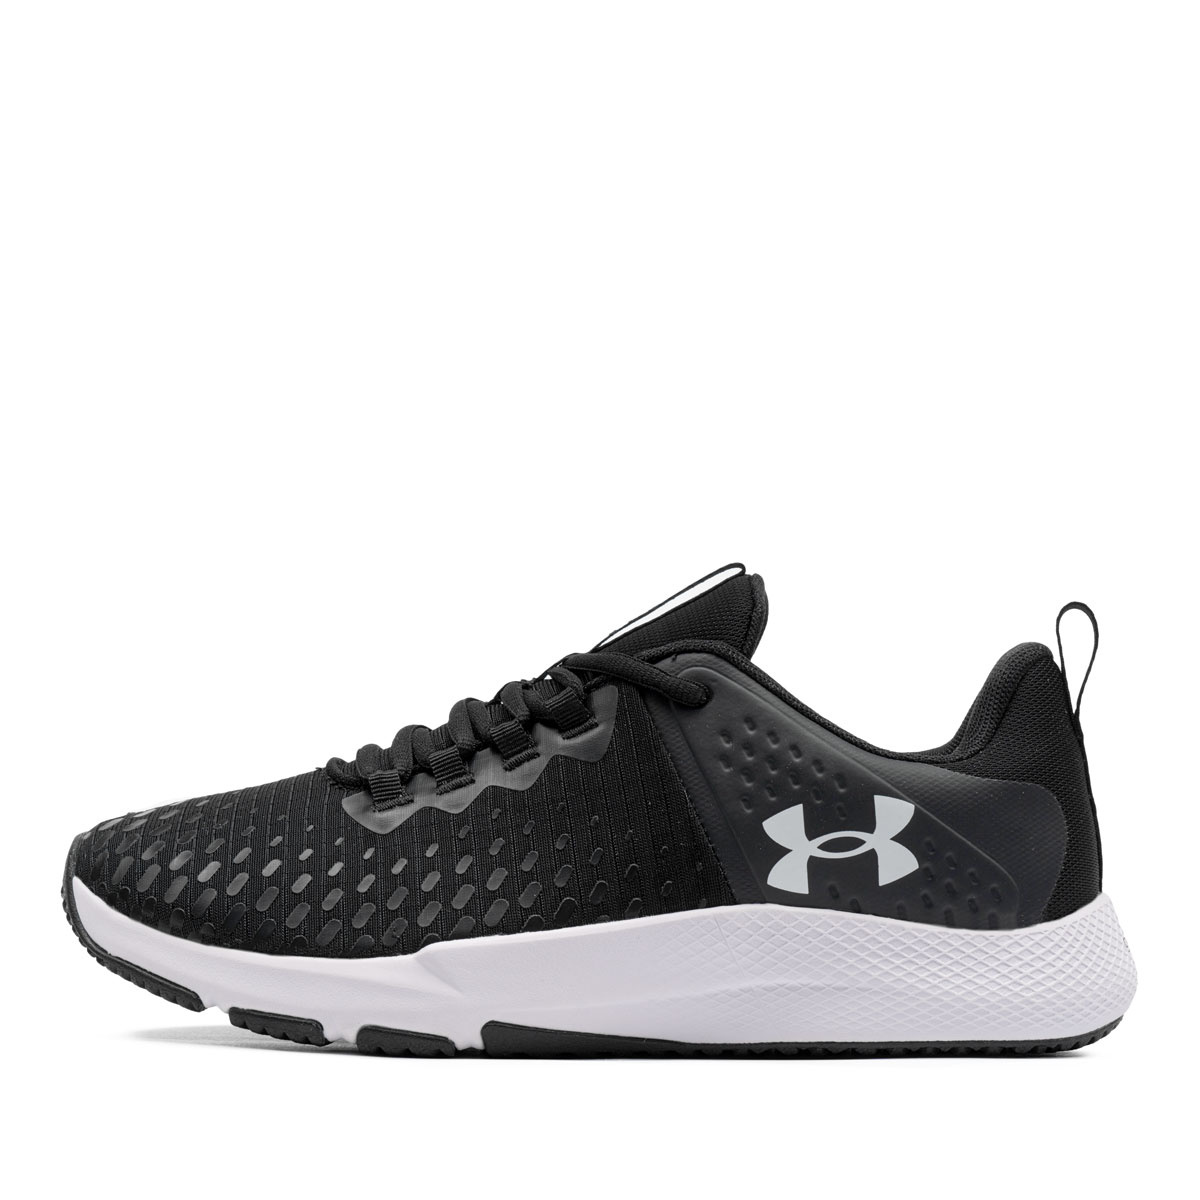 Under Armour Charged Engage 2 Мъжки маратонки 3025527-001